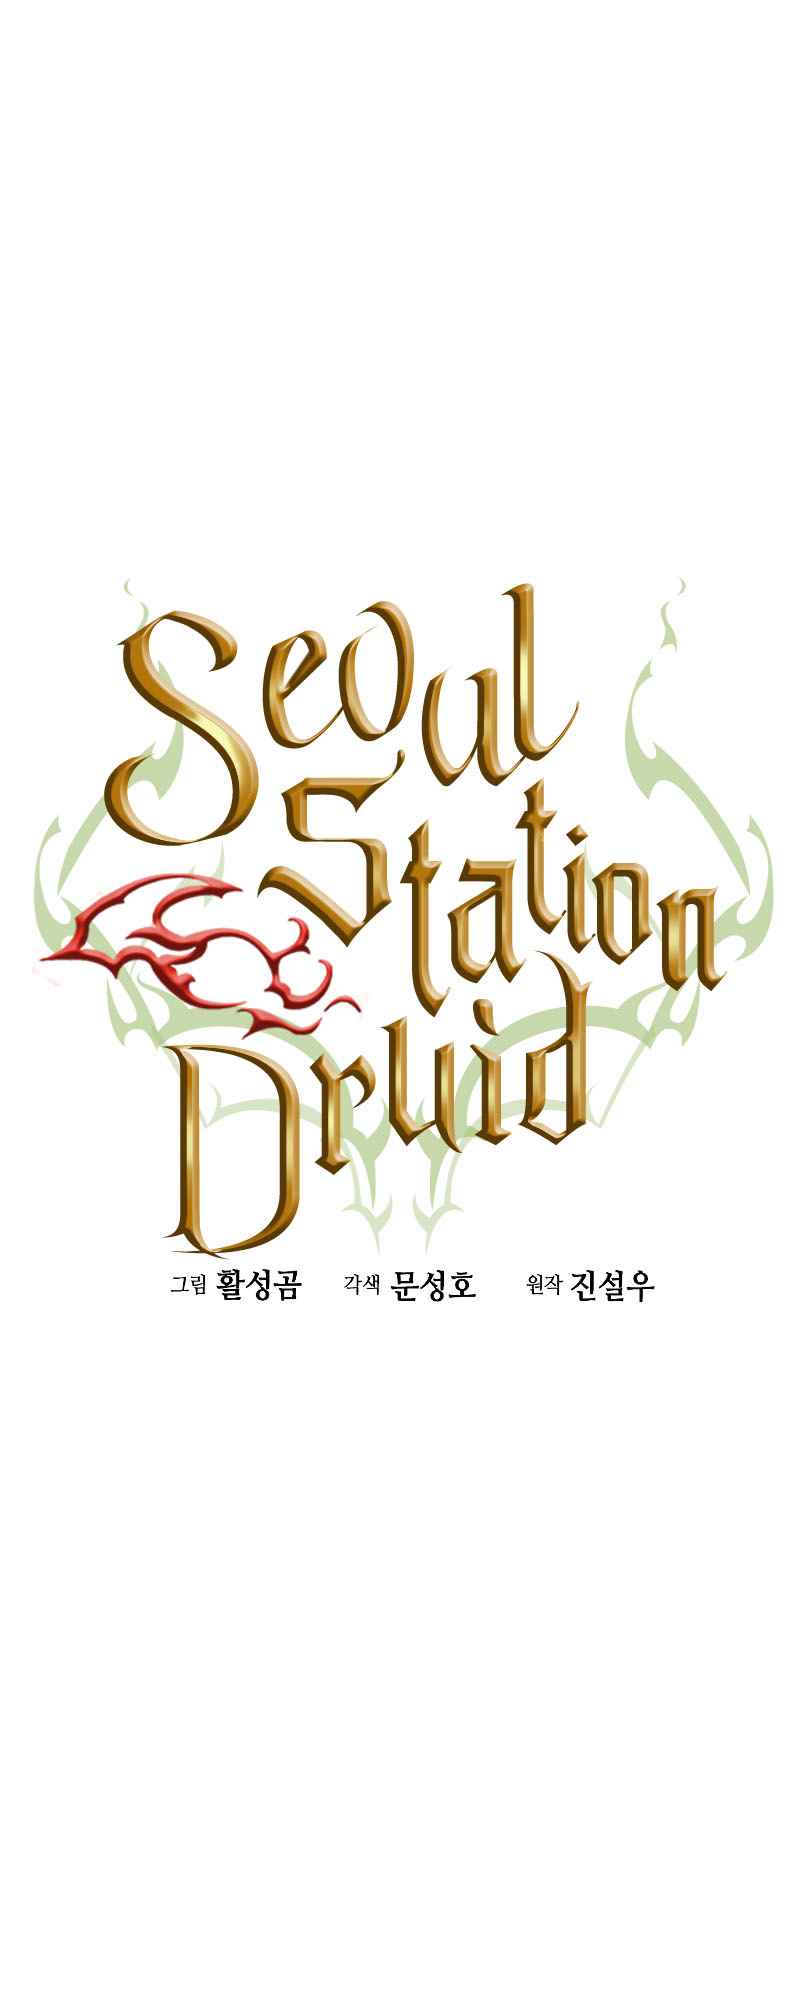 The Druid of Seoul Station 81